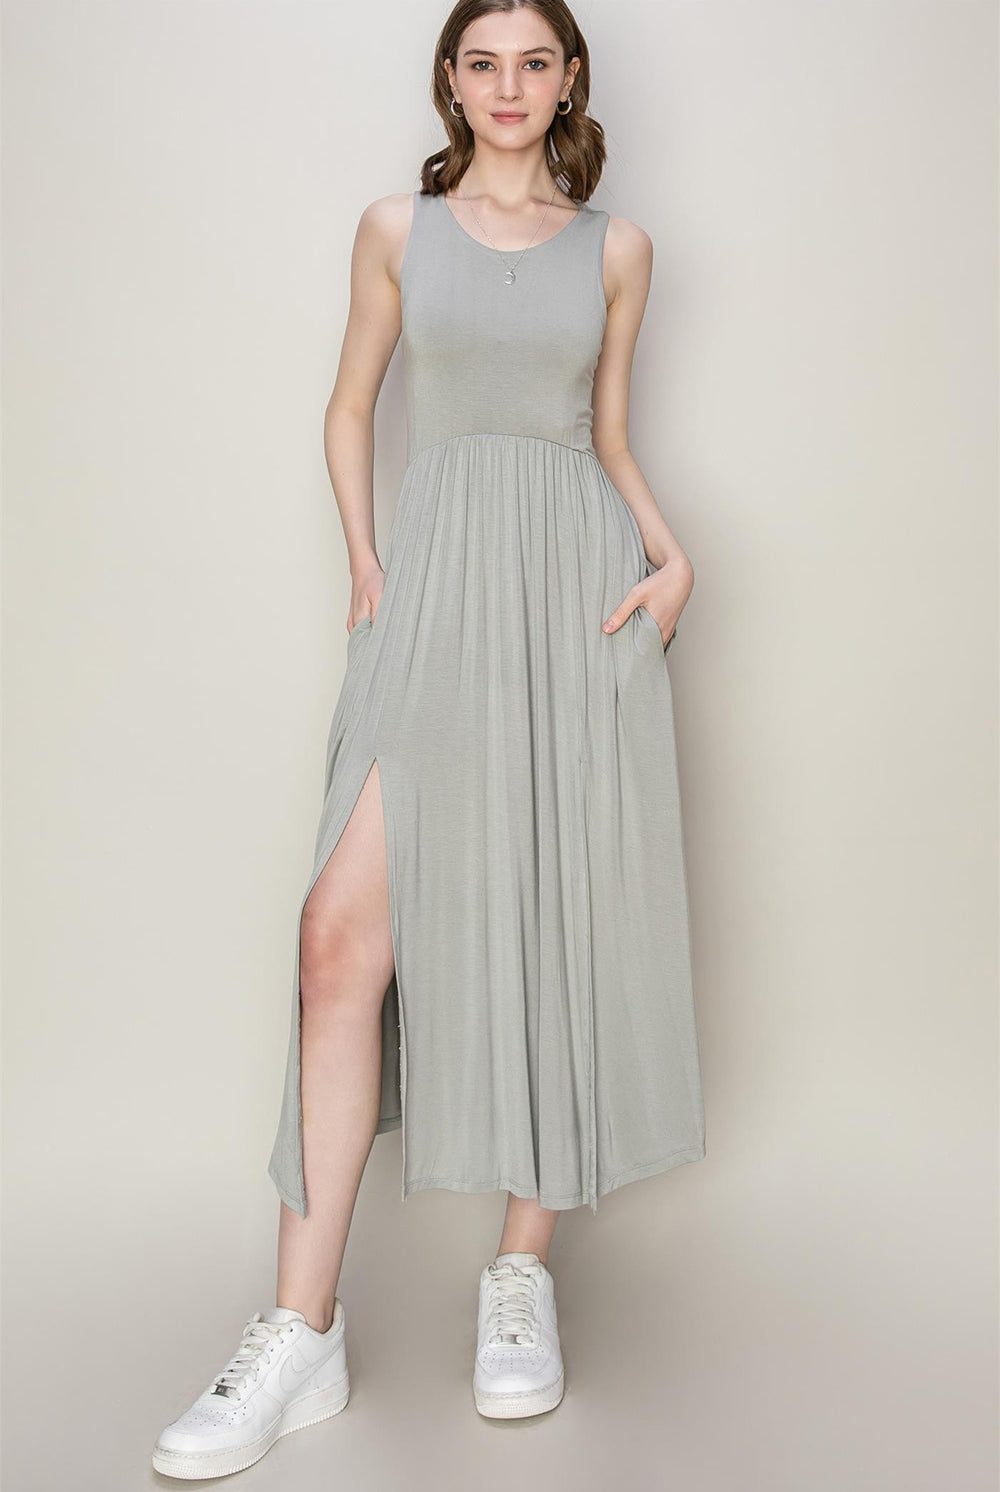 Woman wearing a gray sleeveless midi dress with a slit, paired with white sneakers.